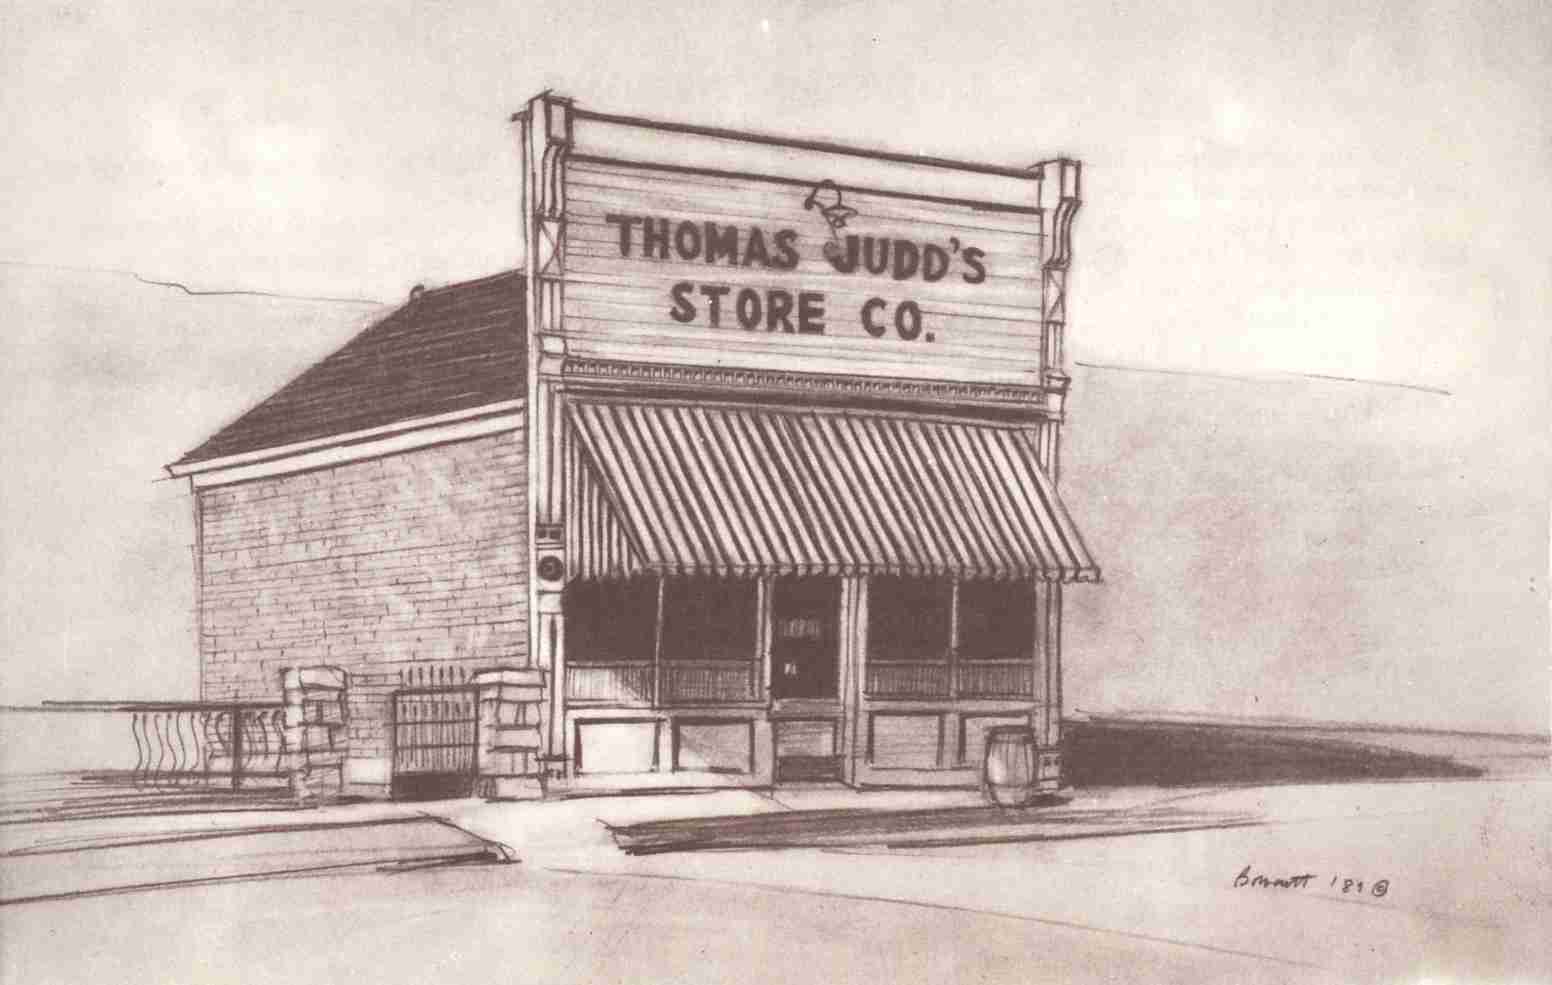 Sketch of the Thomas Judd's Store